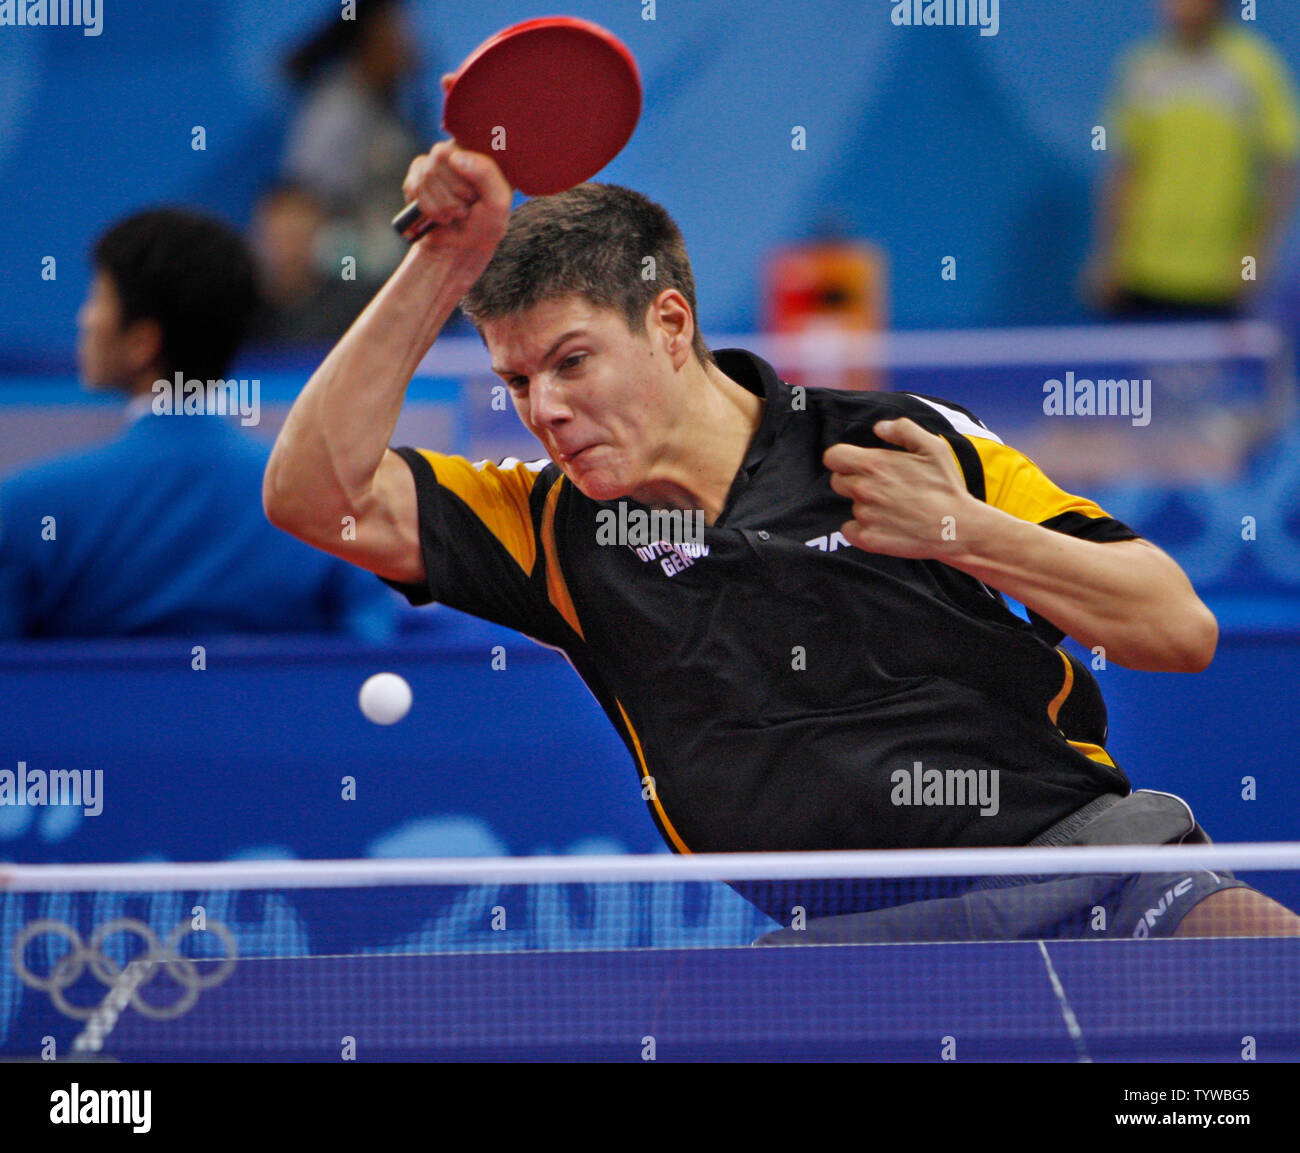 Dimitri Ovtcharov of Germany volleys with Tan Ruiwu of Croatia in the first round of Table Tennis eliminations in Beijing on August 13, 2008.   (UPI Photo/Terry Schmitt) Stock Photo